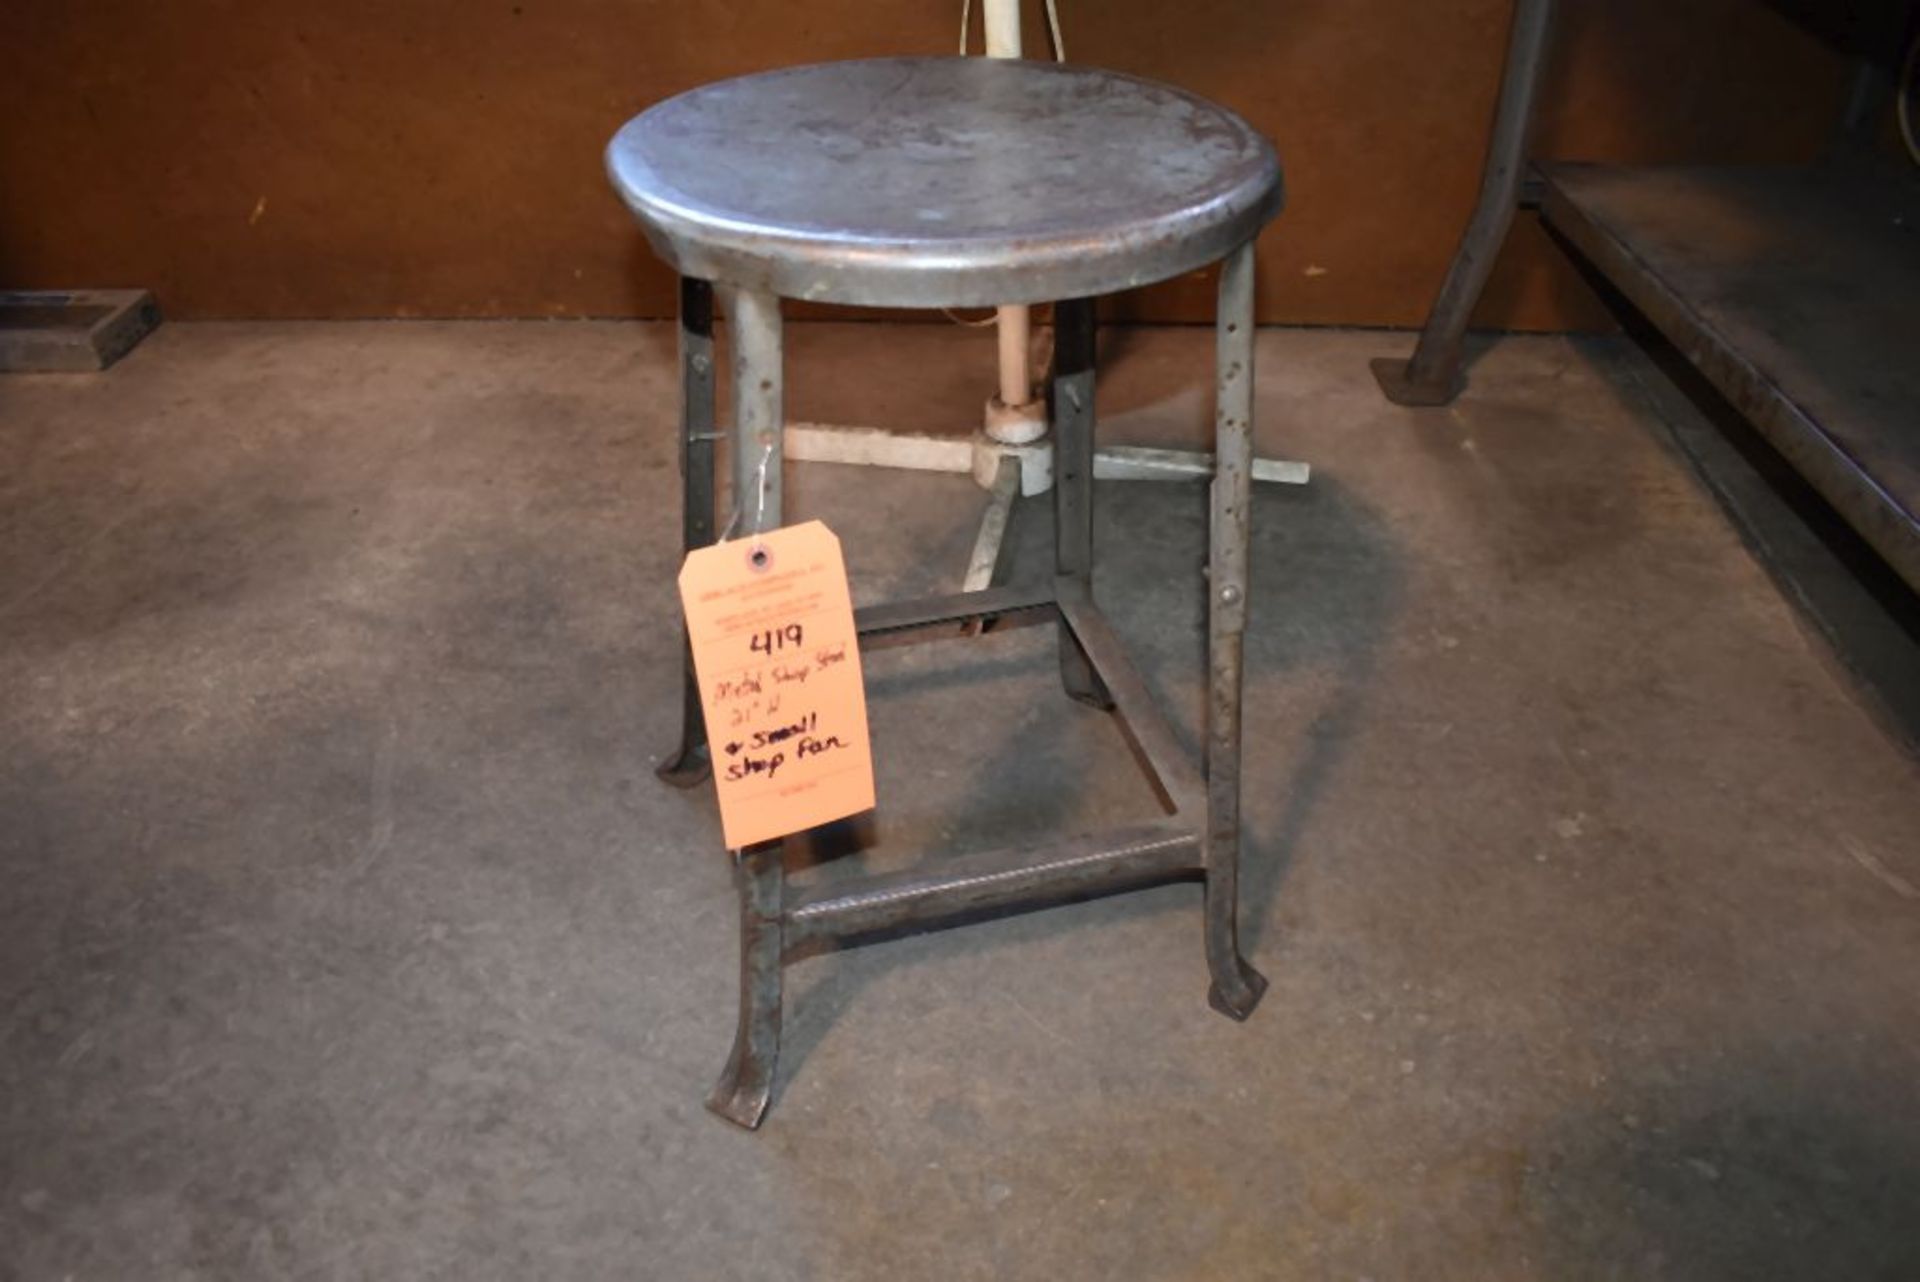 METAL SHOP STOOL, 21"H AND SMALL PEDESTAL SHOP FAN - Image 2 of 2